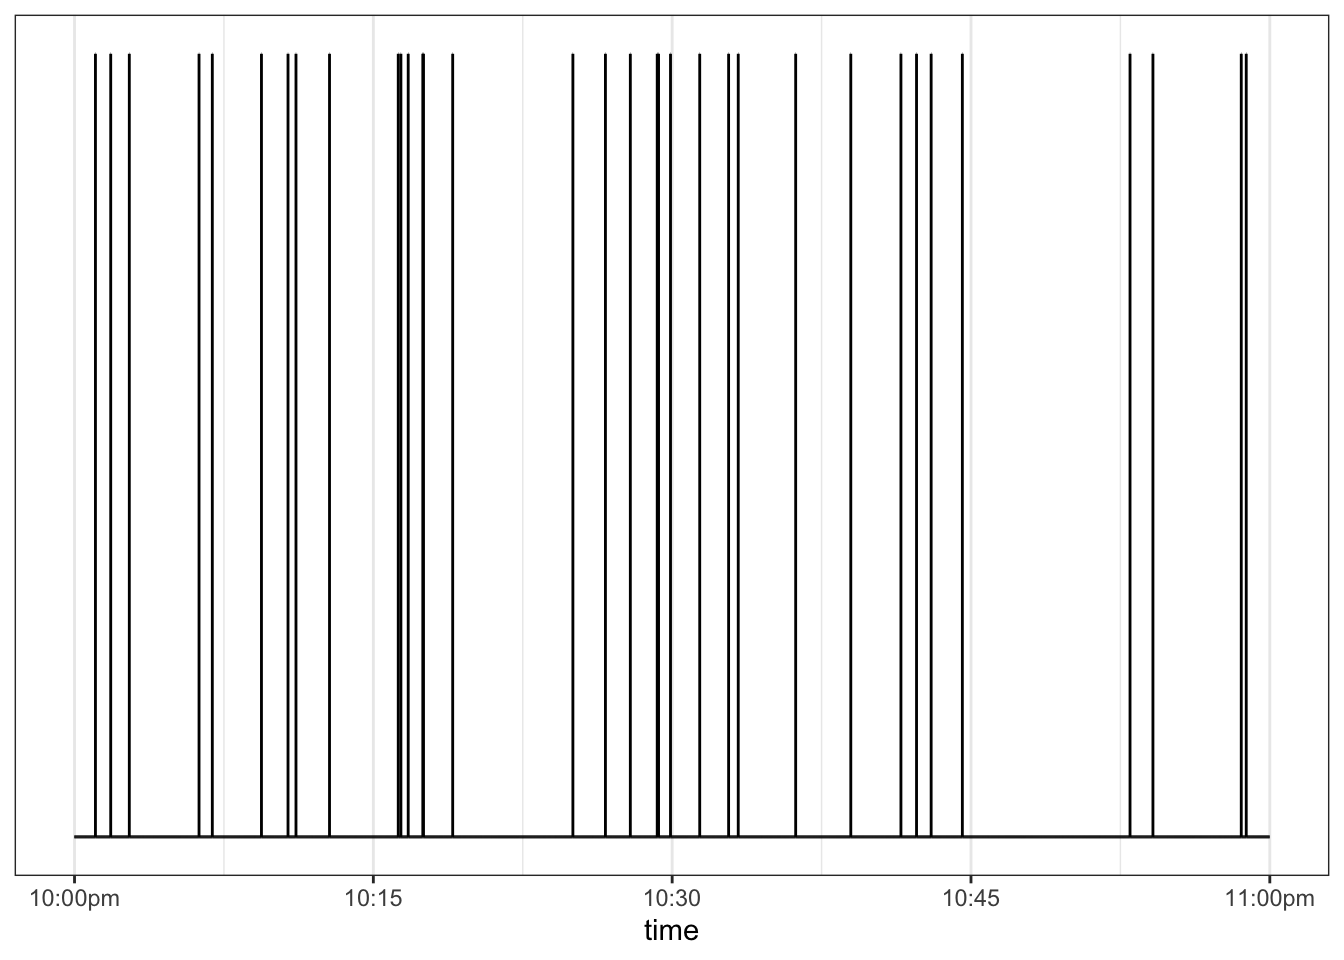 Simulated times of meteorites. Each event is one spike.